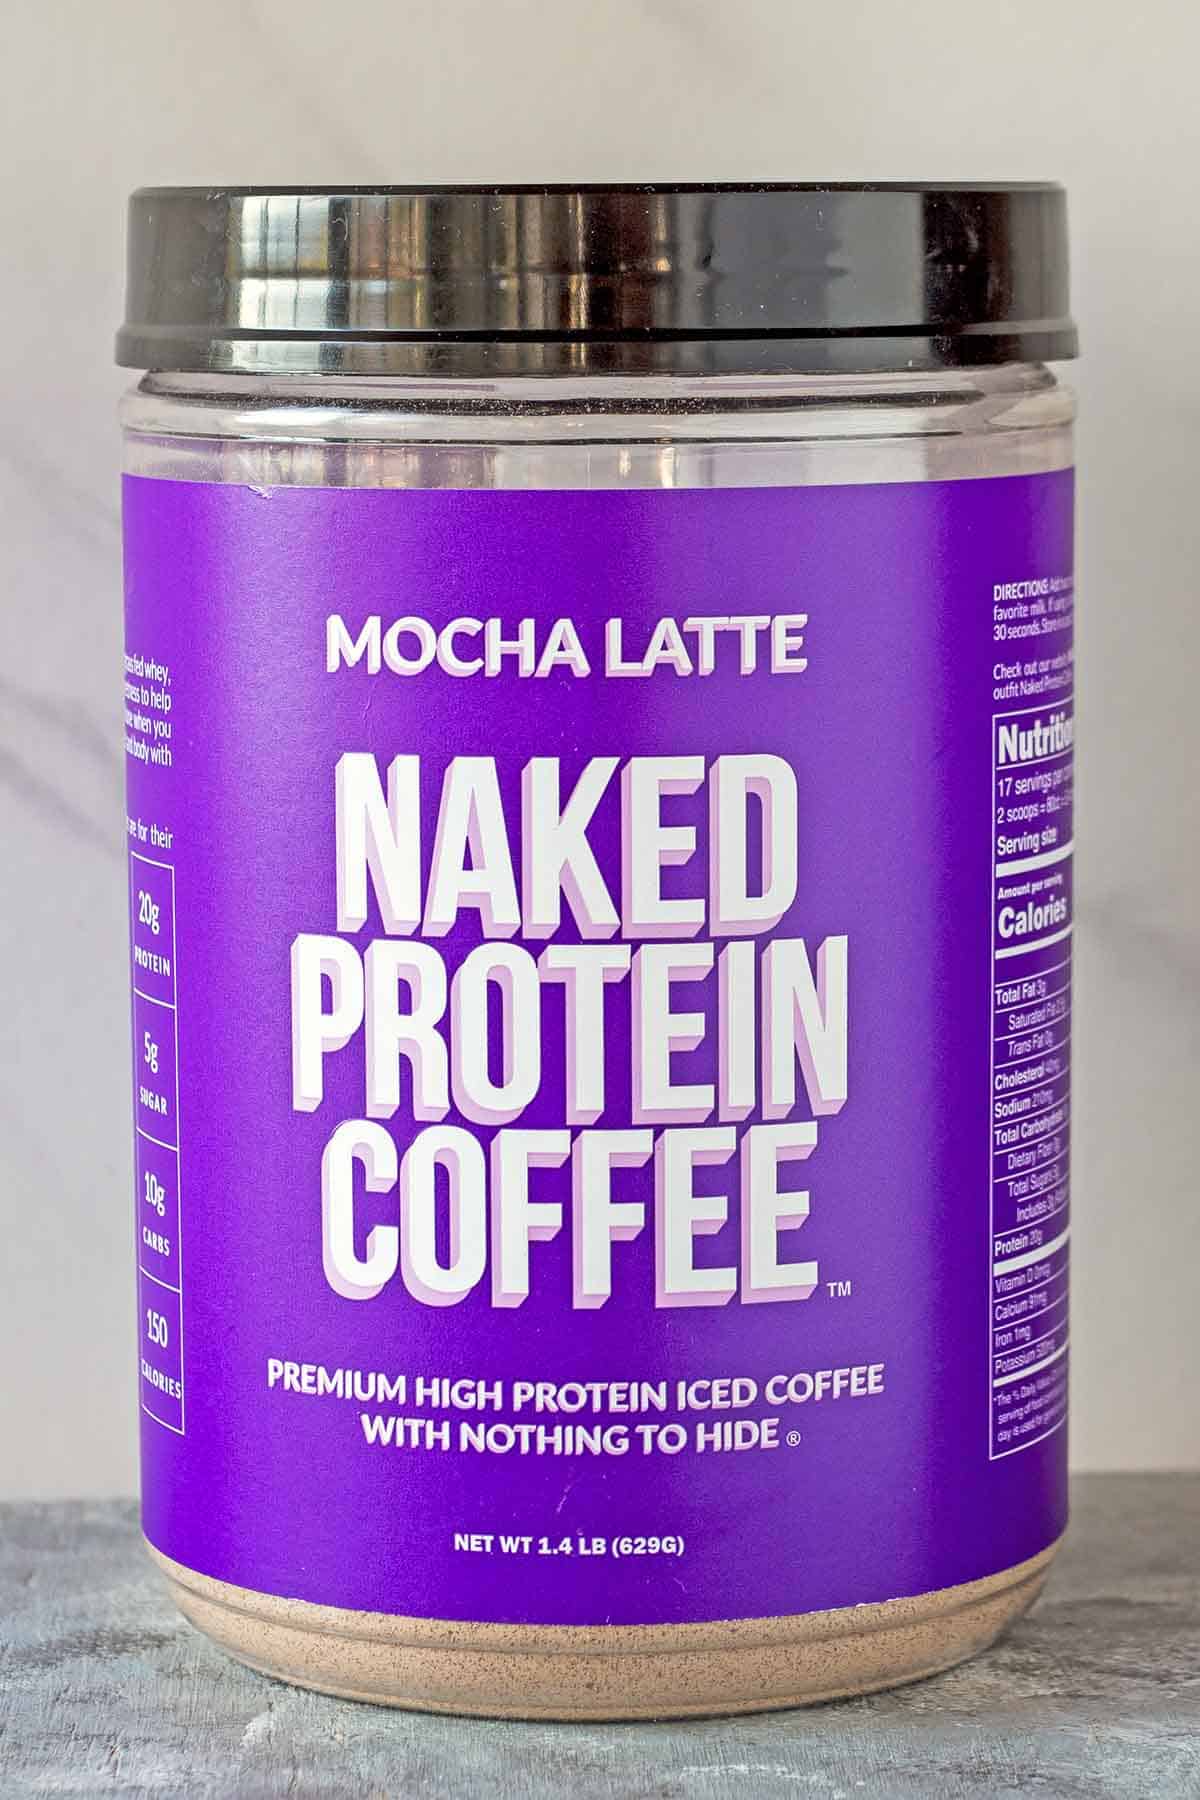 container of Mocha Latte Naked Protein Coffee powder